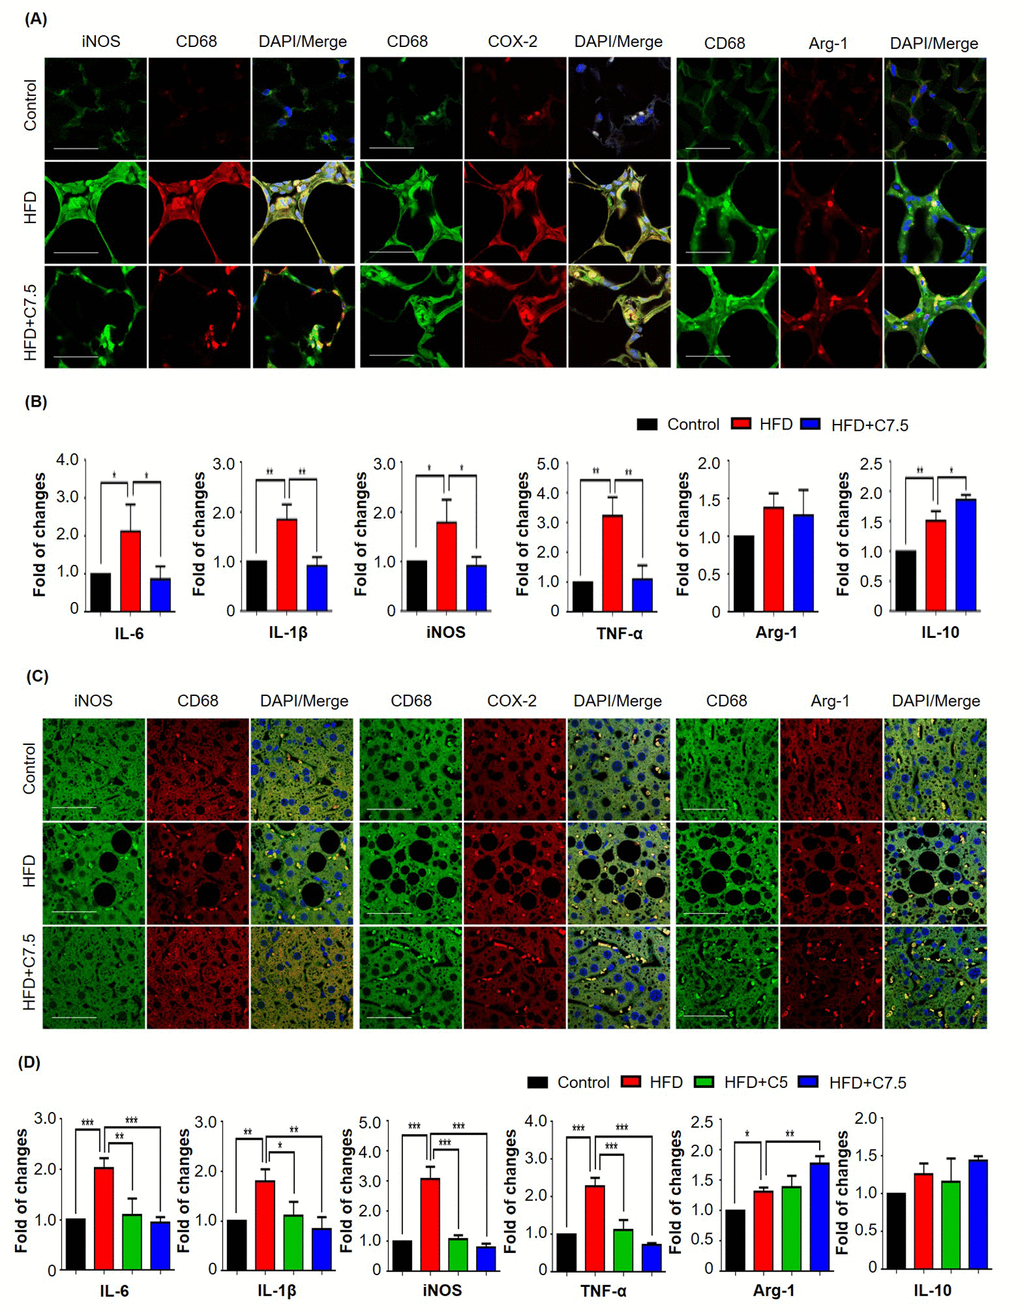 Celastrol differentially affected the expression of macrophage M1 and M2 biomarkers in epididymal adipose tissues and liver. (A) Detection of iNOS, COX-2, and arginase-1 in epididymal adipose tissues. After 21-day treatment, epididymal fat pads were recovered from mice, and stained with specific antibodies. CD68 was stained as pan-macrophage biomarker whereas the cell nuclei were stained with DAPI. The sections were imaged under a Zeiss LSM 780 confocal microscopy. Representative images were shown. Scale bar, 50 μm. (B) qRT-PCR quantification of macrophage M1 and M2 biomarkers in epididymal adipose tissues. Total RNAs were extracted from adipose tissues and analyzed by qRT-PCR technique using QuantiTect SYBR Green PCR Kit and specific DNA primers from Qiagen. N = 3; HFD, HFD only; C7.5, celastrol (7.5 mg/kg/d). (C) Detection of iNOS, COX-2, and arginase-1 in liver tissues. Livers were recovered from mice, and stained with specific antibodies. CD68 was stained as pan-macrophage biomarker whereas the cell nuclei were stained with DAPI. The sections were imaged under a Zeiss LSM 780 confocal microscopy. Representative images were shown. Scale bar, 50 μm. (D) qRT-PCR quantification of macrophage M1 and M2 biomarkers in liver tissues. Total RNAs were extracted from livers and analyzed by qRT-PCR technique using QuantiTect SYBR Green PCR Kit and specific DNA primers from Qiagen company. N = 3; HFD, HFD only; C5, celastrol (5 mg/kg/d); C7.5, celastrol (7.5 mg/kg/d); *, p p p 